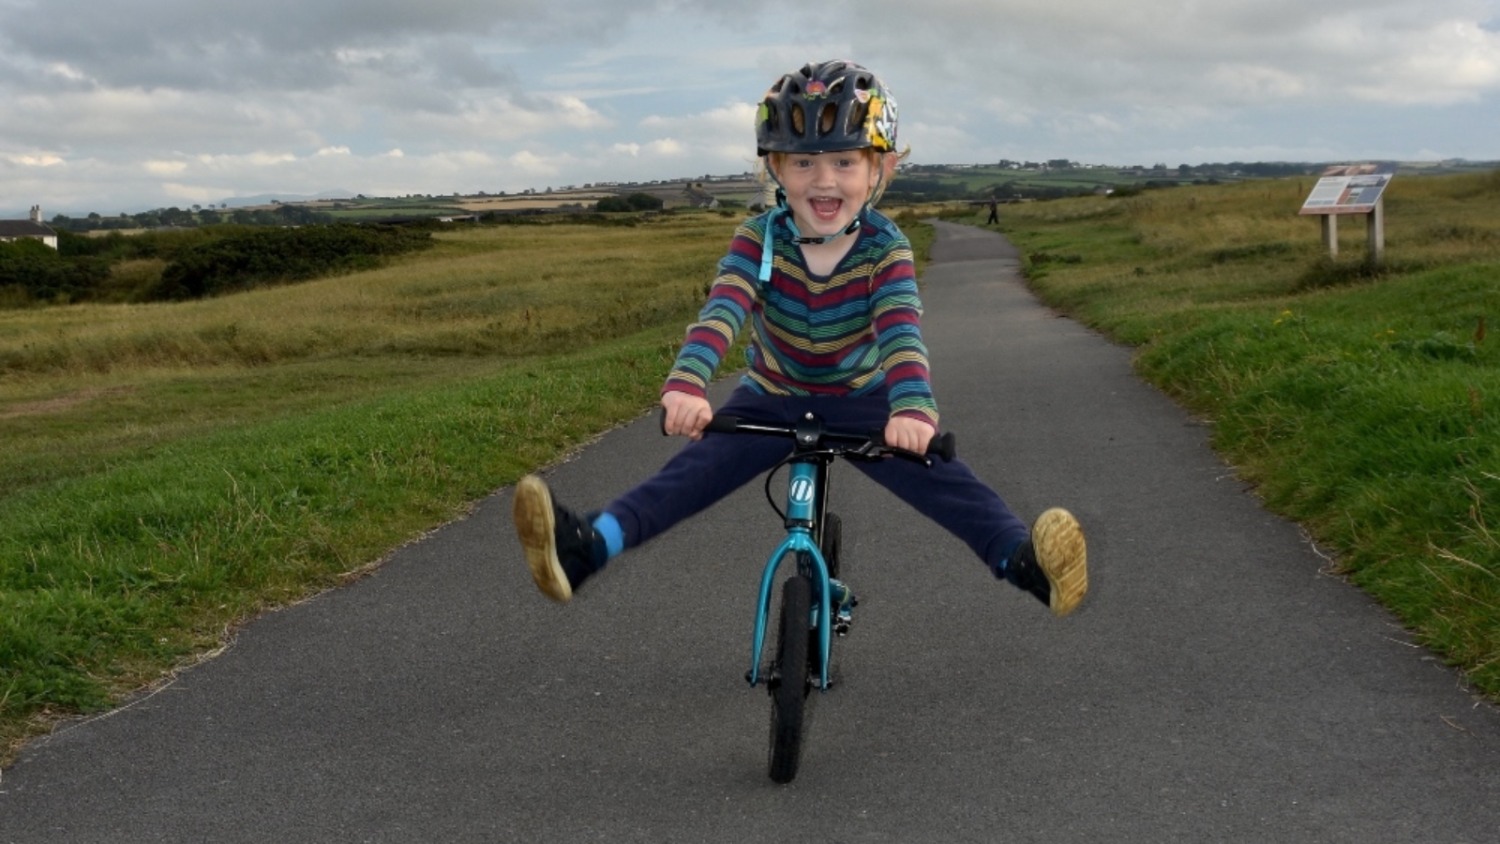 A toddler riding a balance bike towards the camera, smiling and lifting her legs out wide